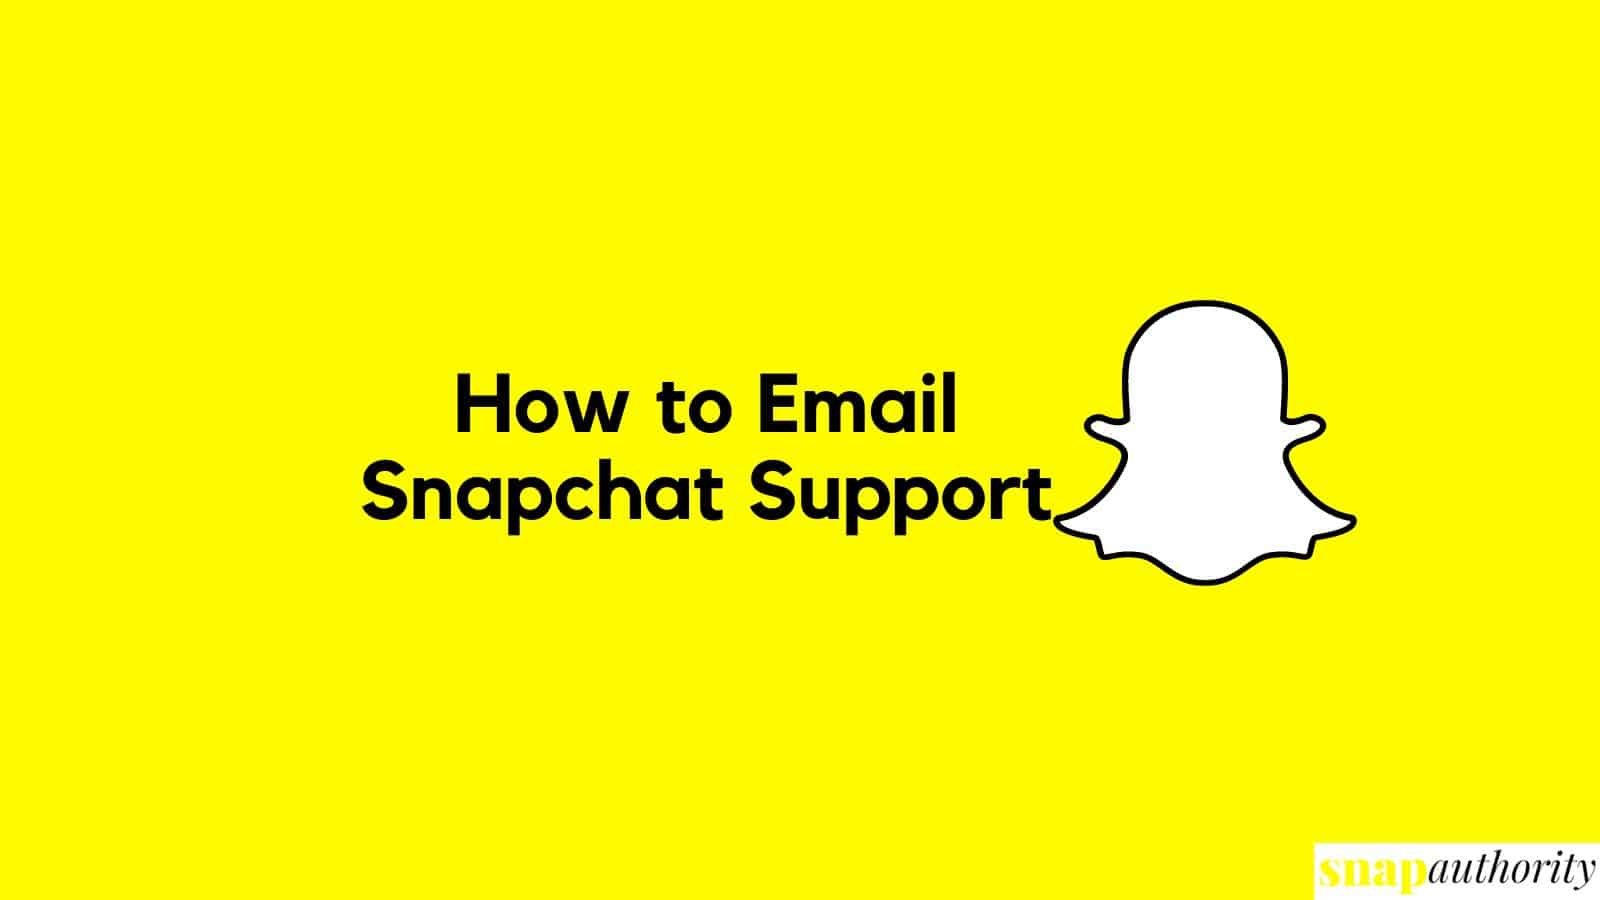 How to Email Snapchat Support